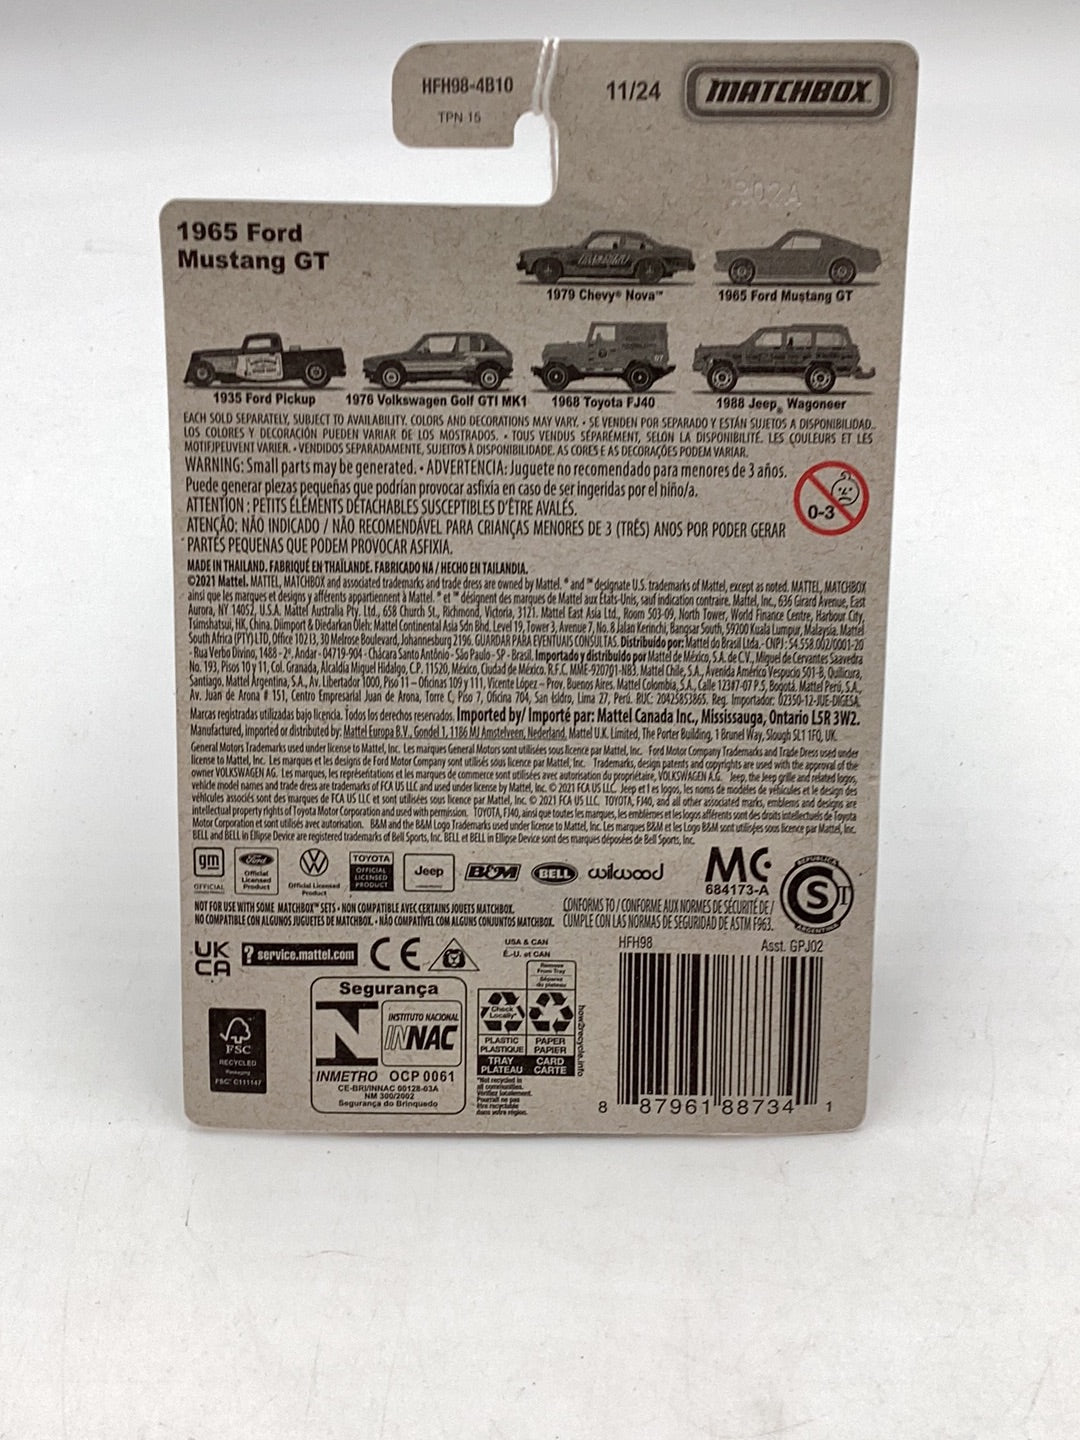 2022 Matchbox Retro Series #11 1965 Ford Mustang GT Target Exclusive EE2